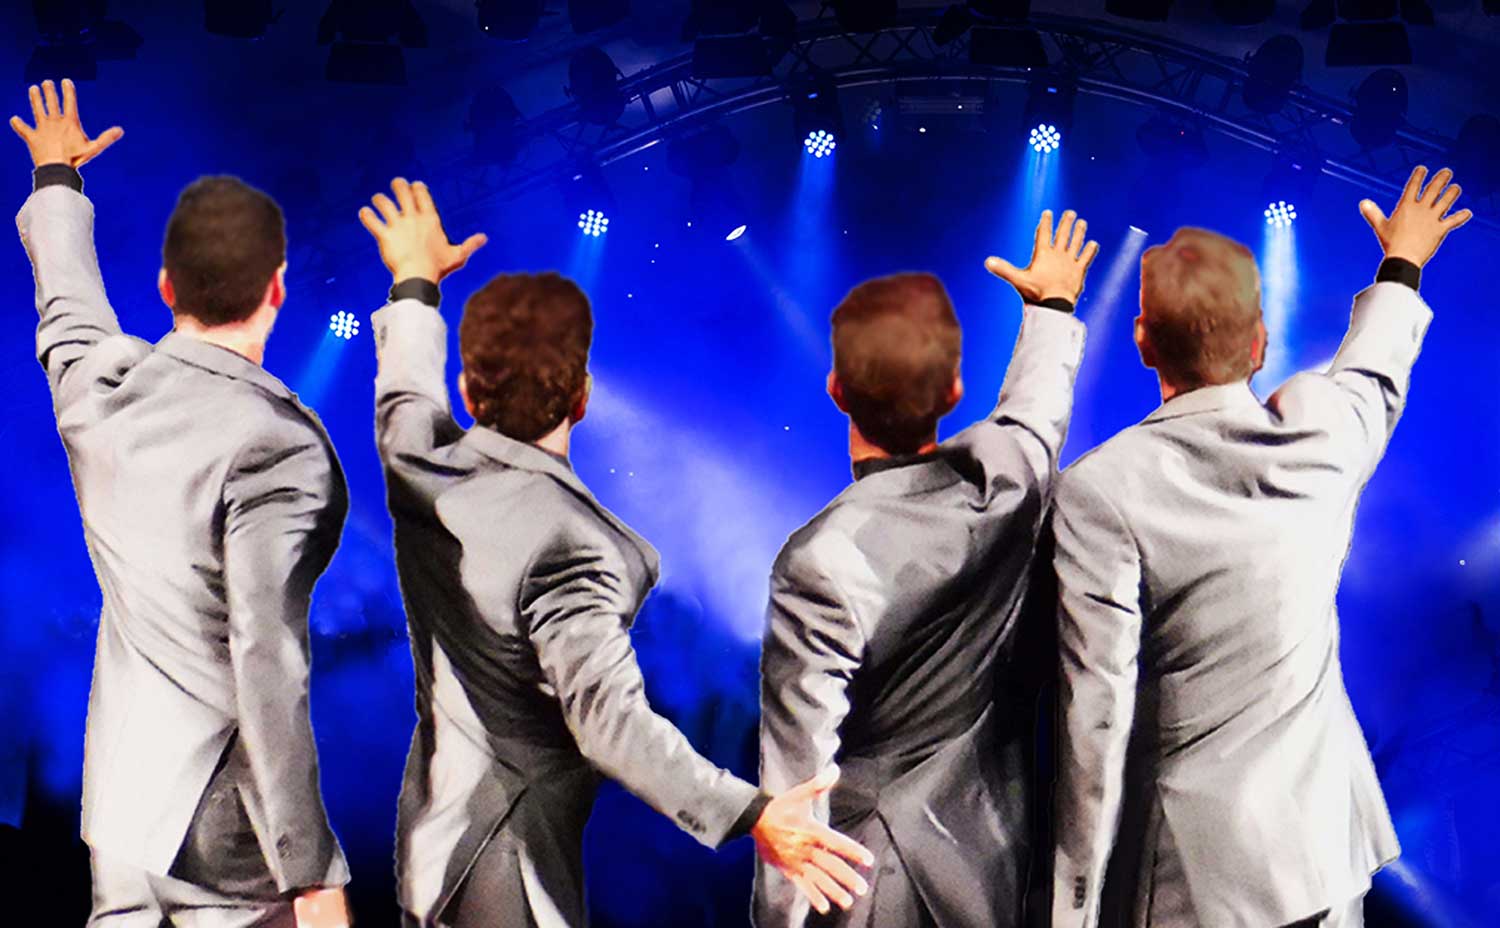 OH WHAT A NIGHT! A Musical Tribute To Frankie Valli And The Four Seasons